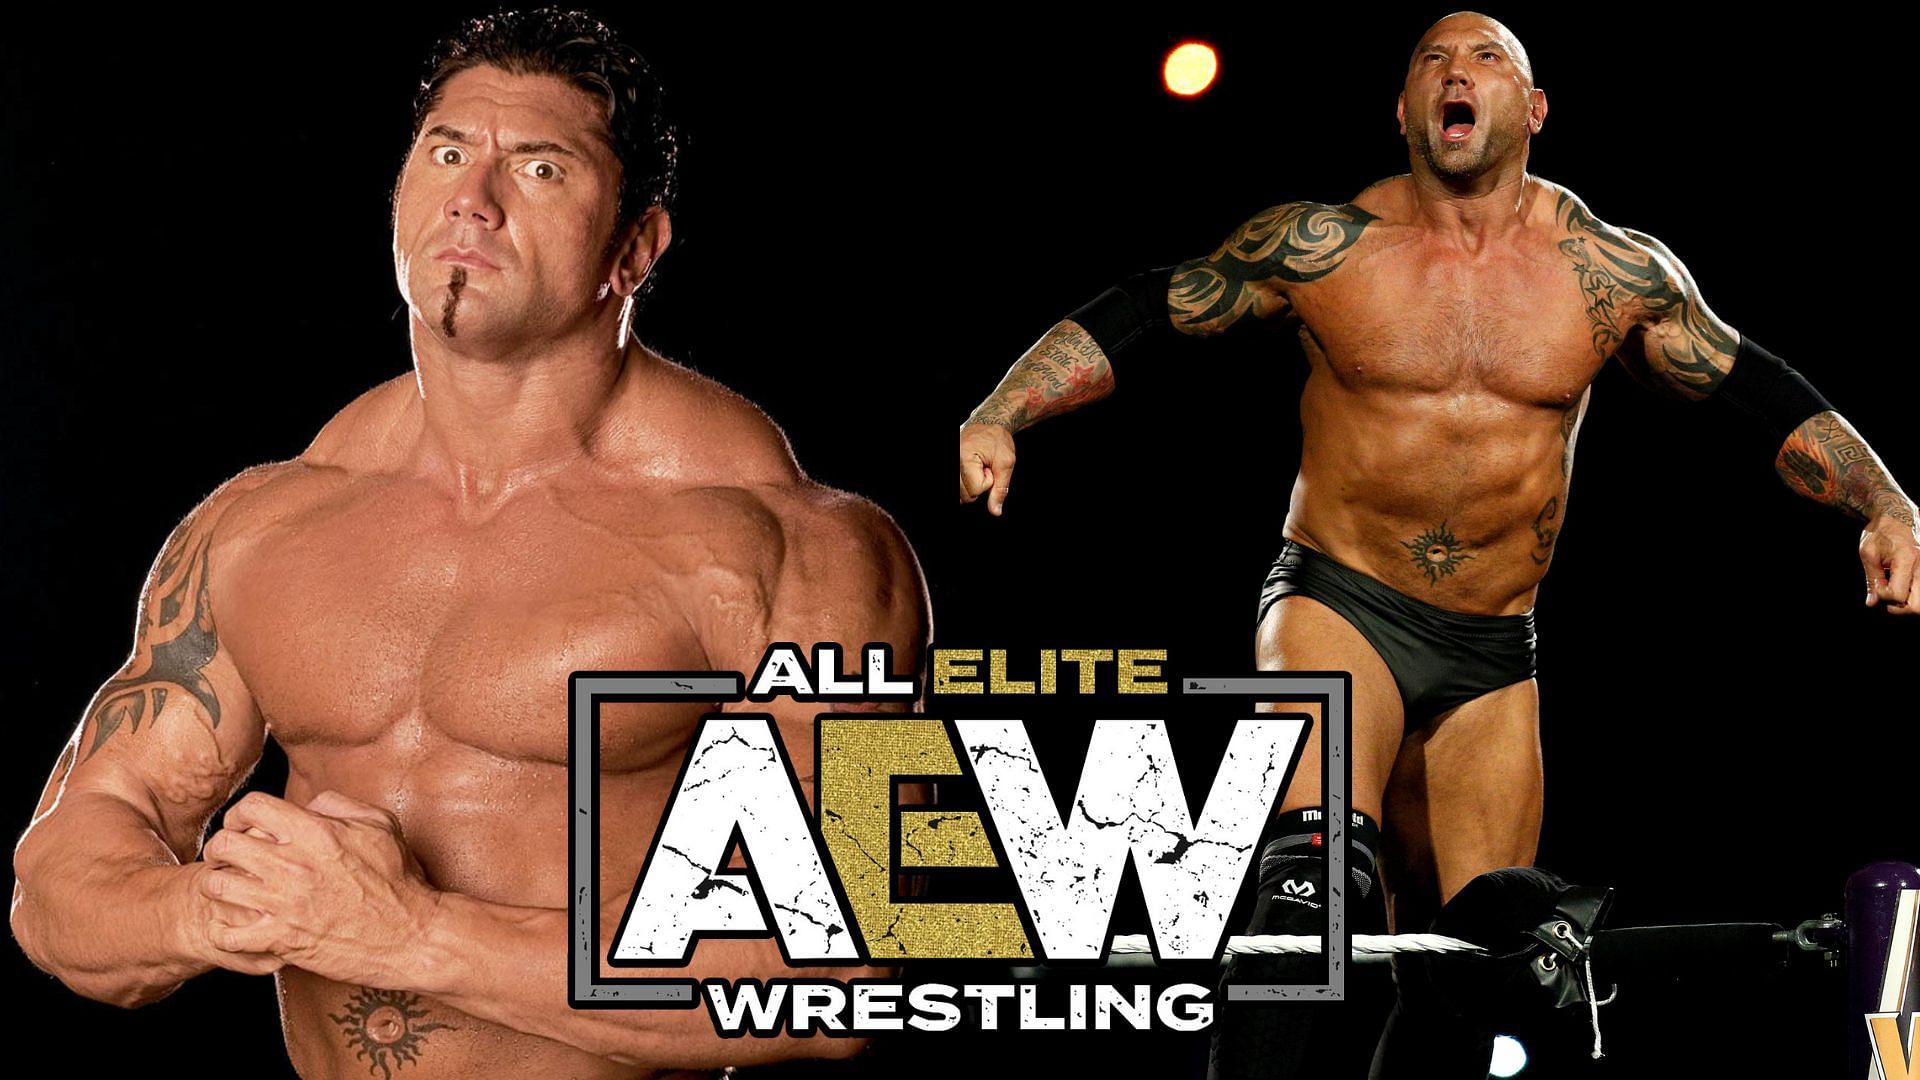 How many similarities does Batista have with this AEW star?